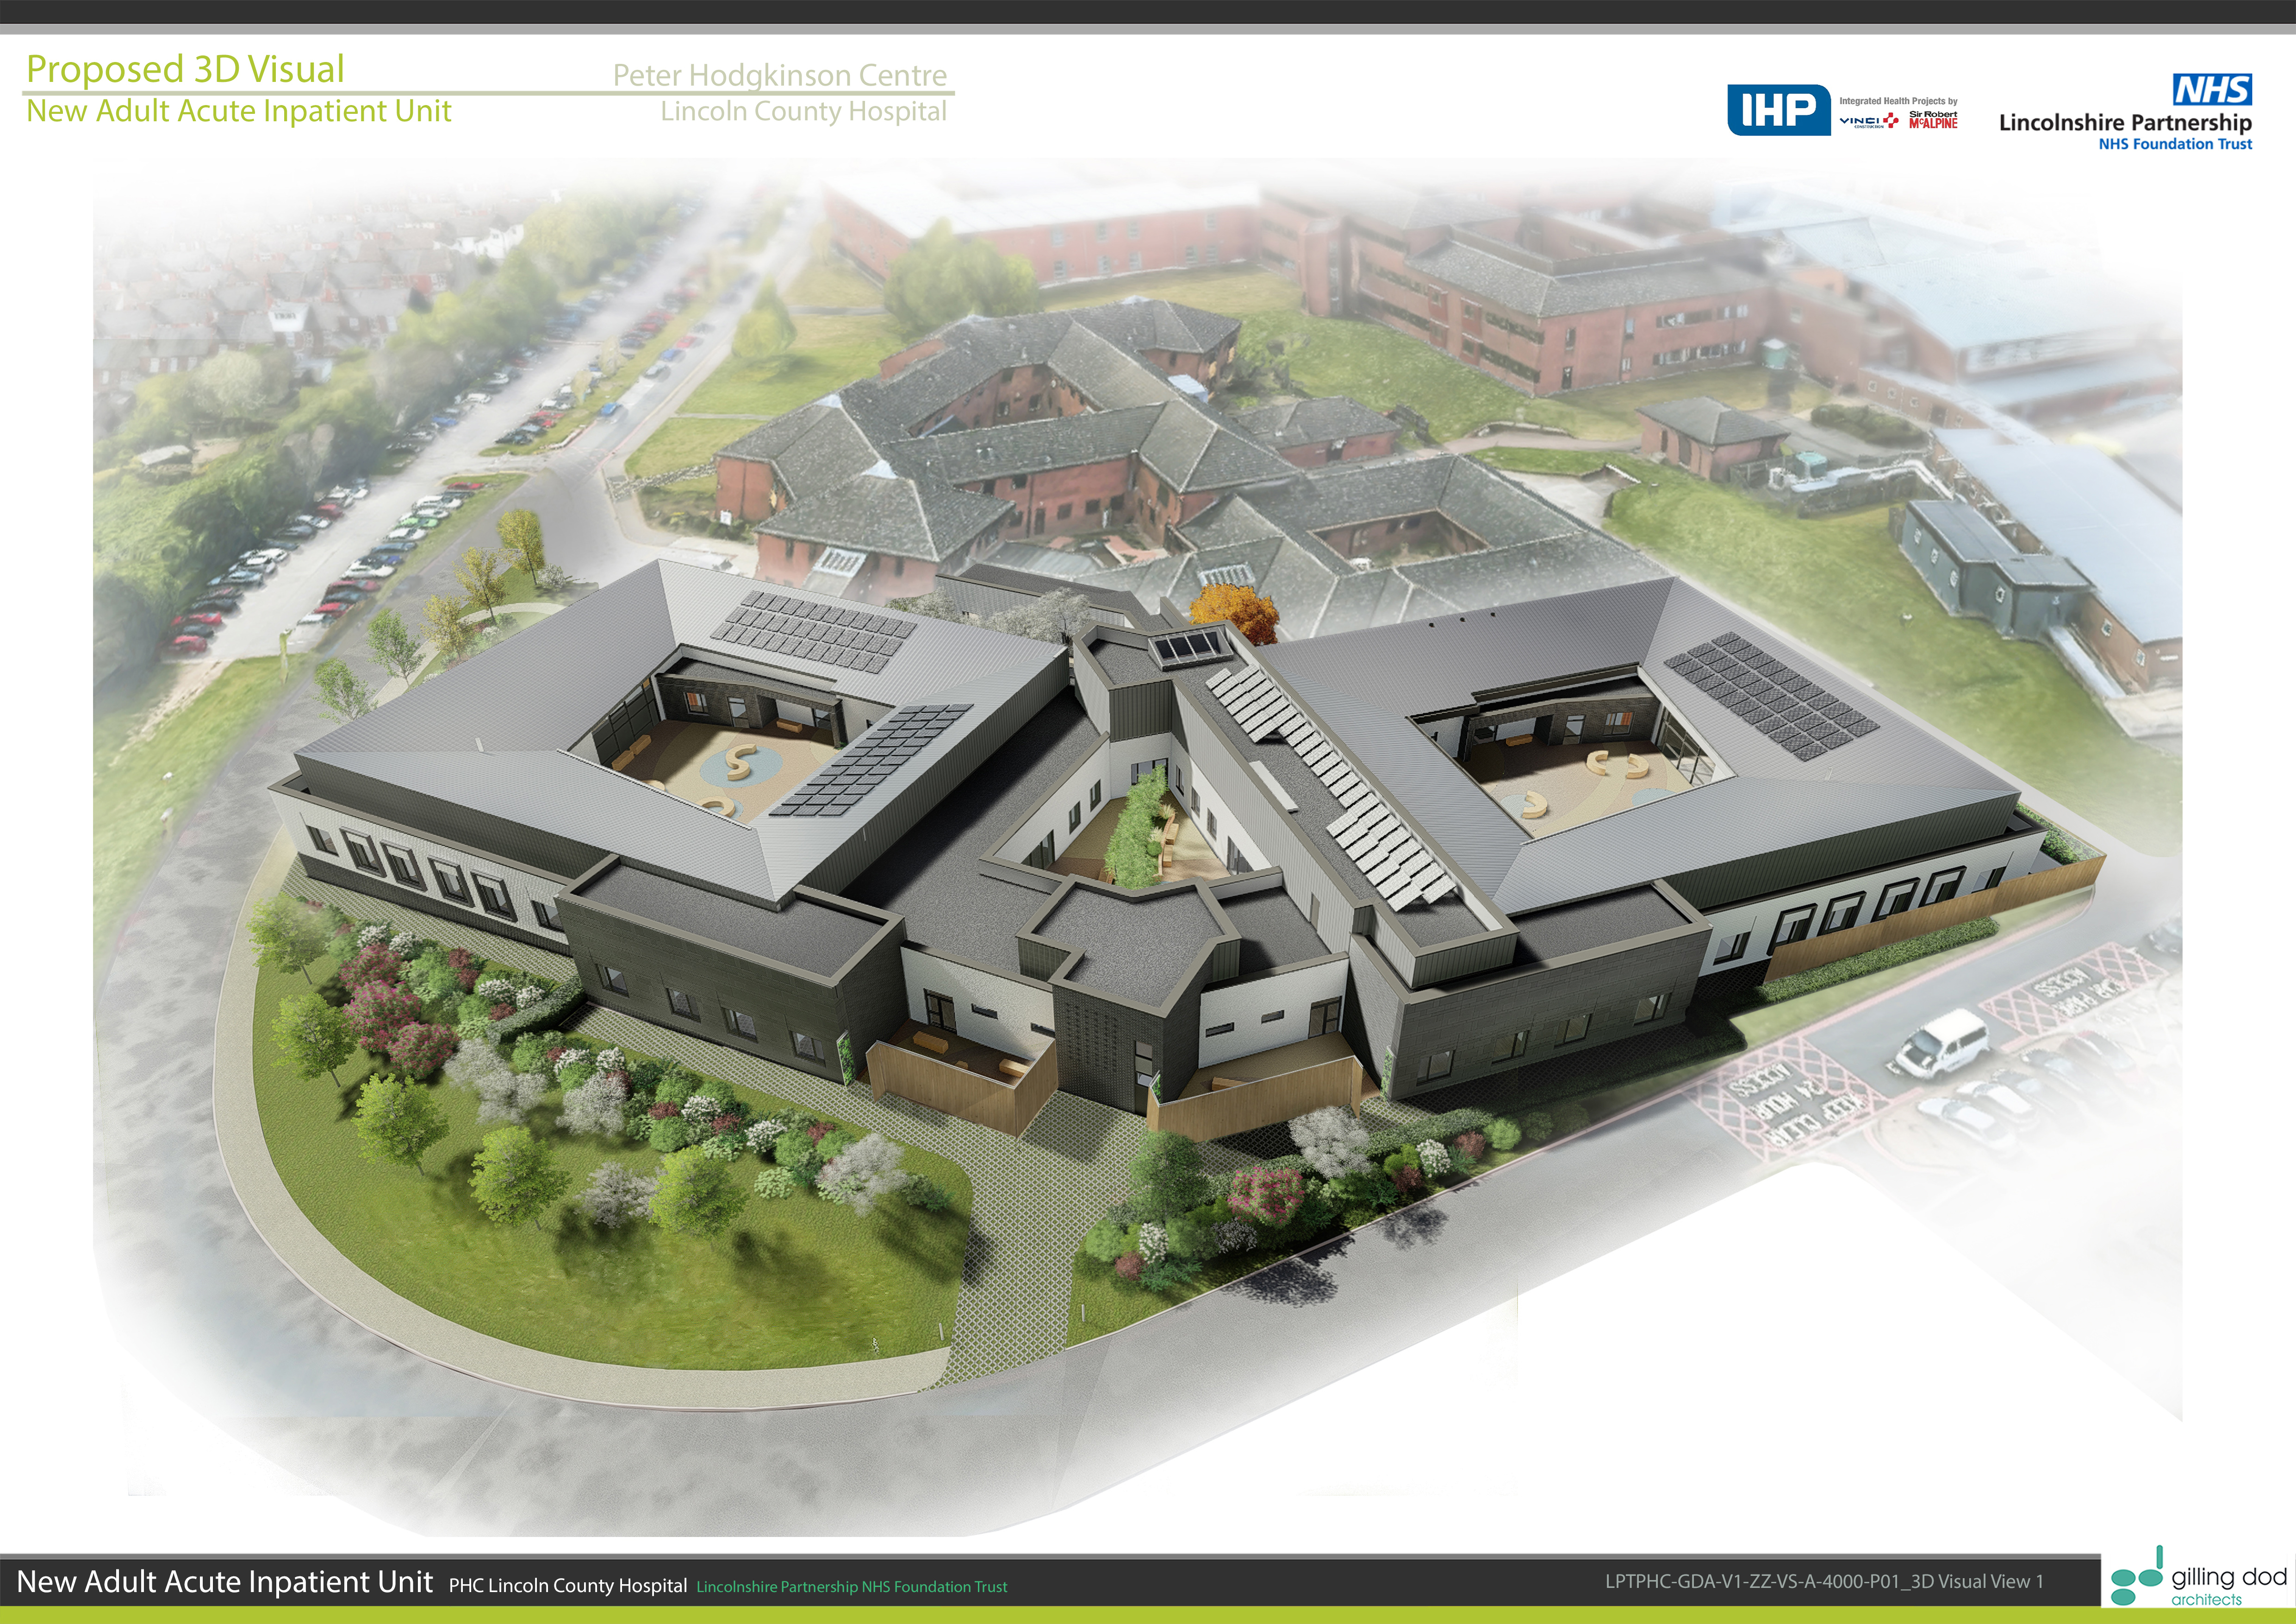 Plans for new wards at the Peter Hodgkinson Centre, Lincoln